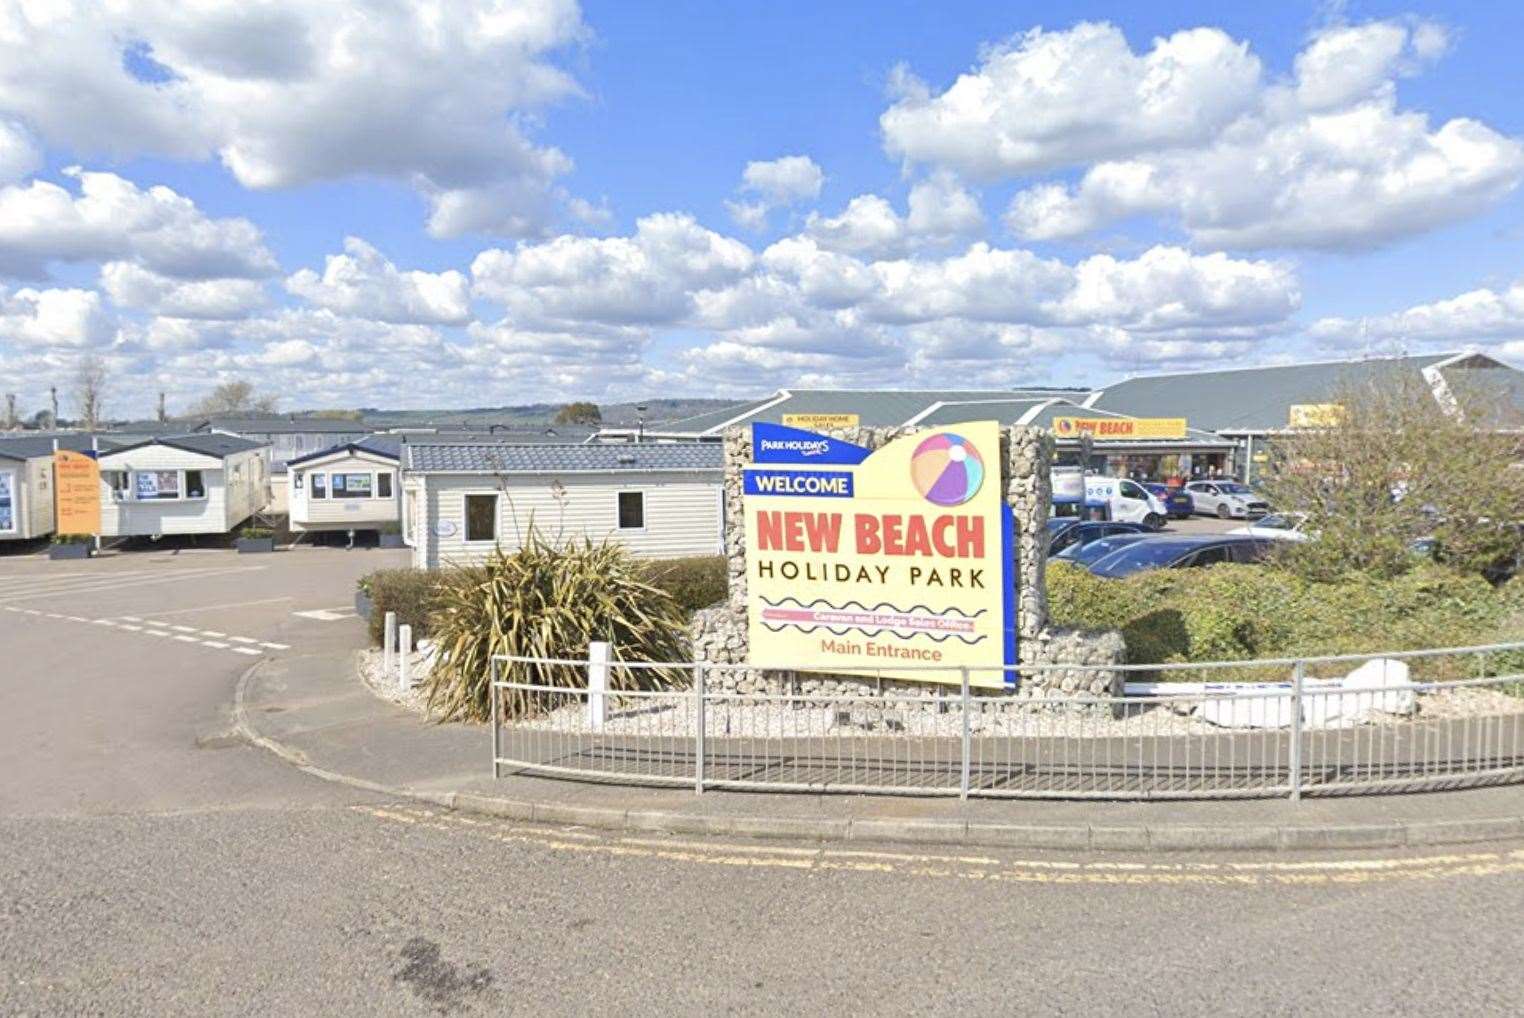 Robert Barton, 41, damaged arcade games and stole cash from New Beach Holiday Park in Dymchurch. Picture: Google Maps